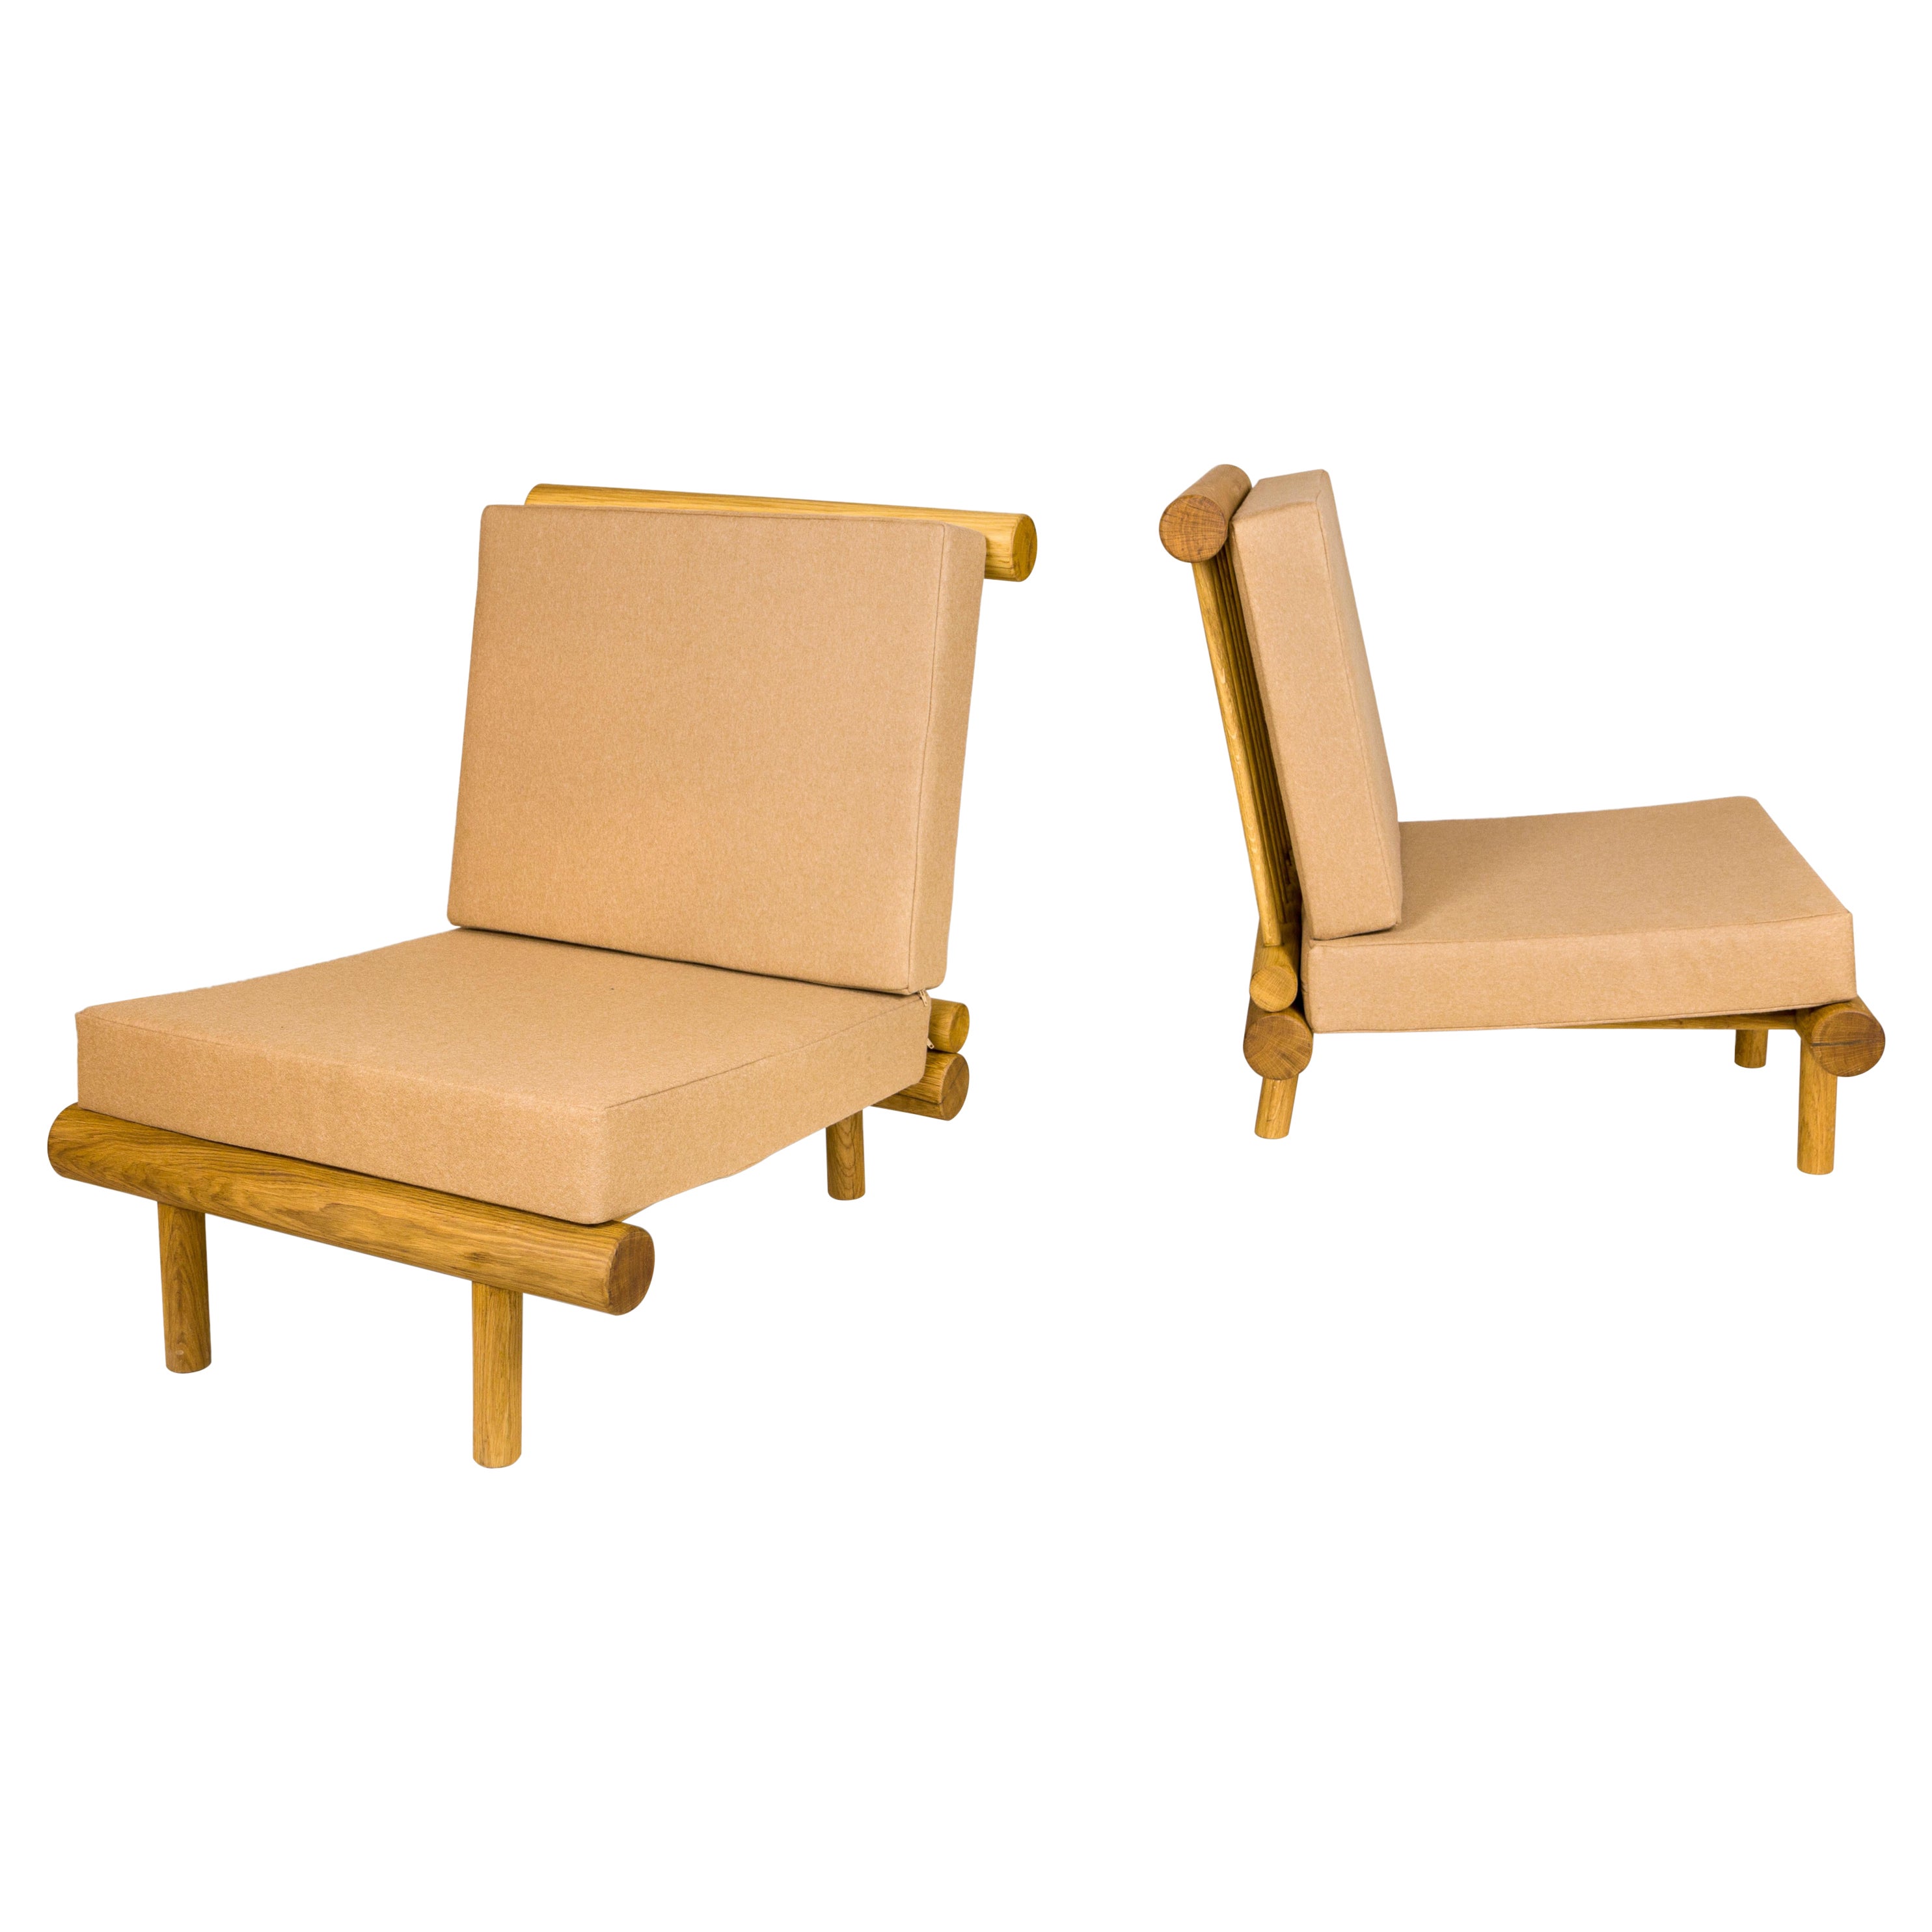 Pair of Charlotte Perriand Chairs "La Cachette", circa 1968, France For Sale